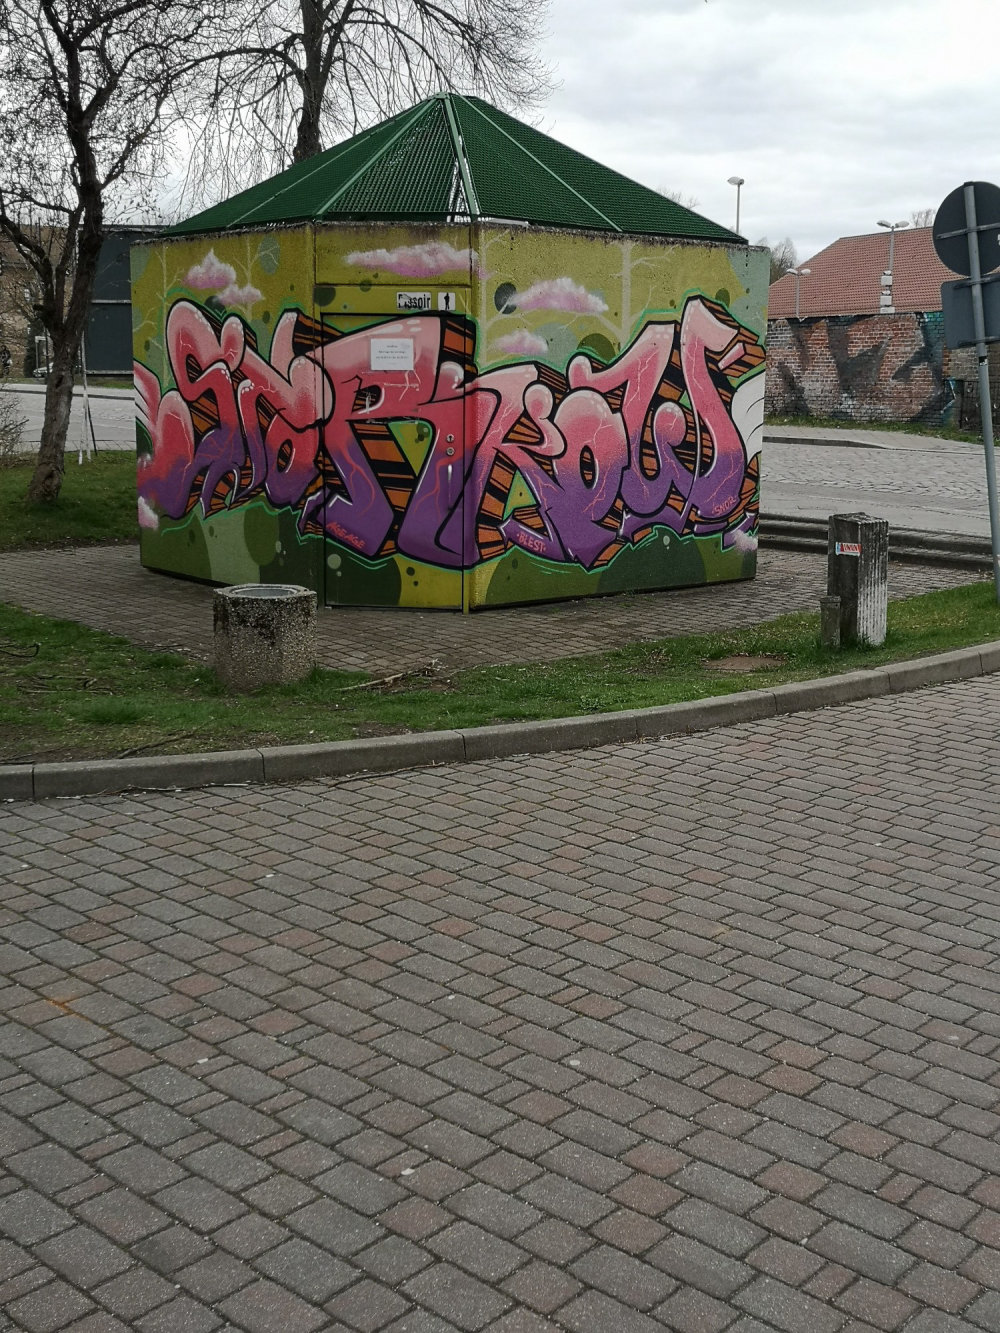 mural in Storkow (Mark) by artist unknown.